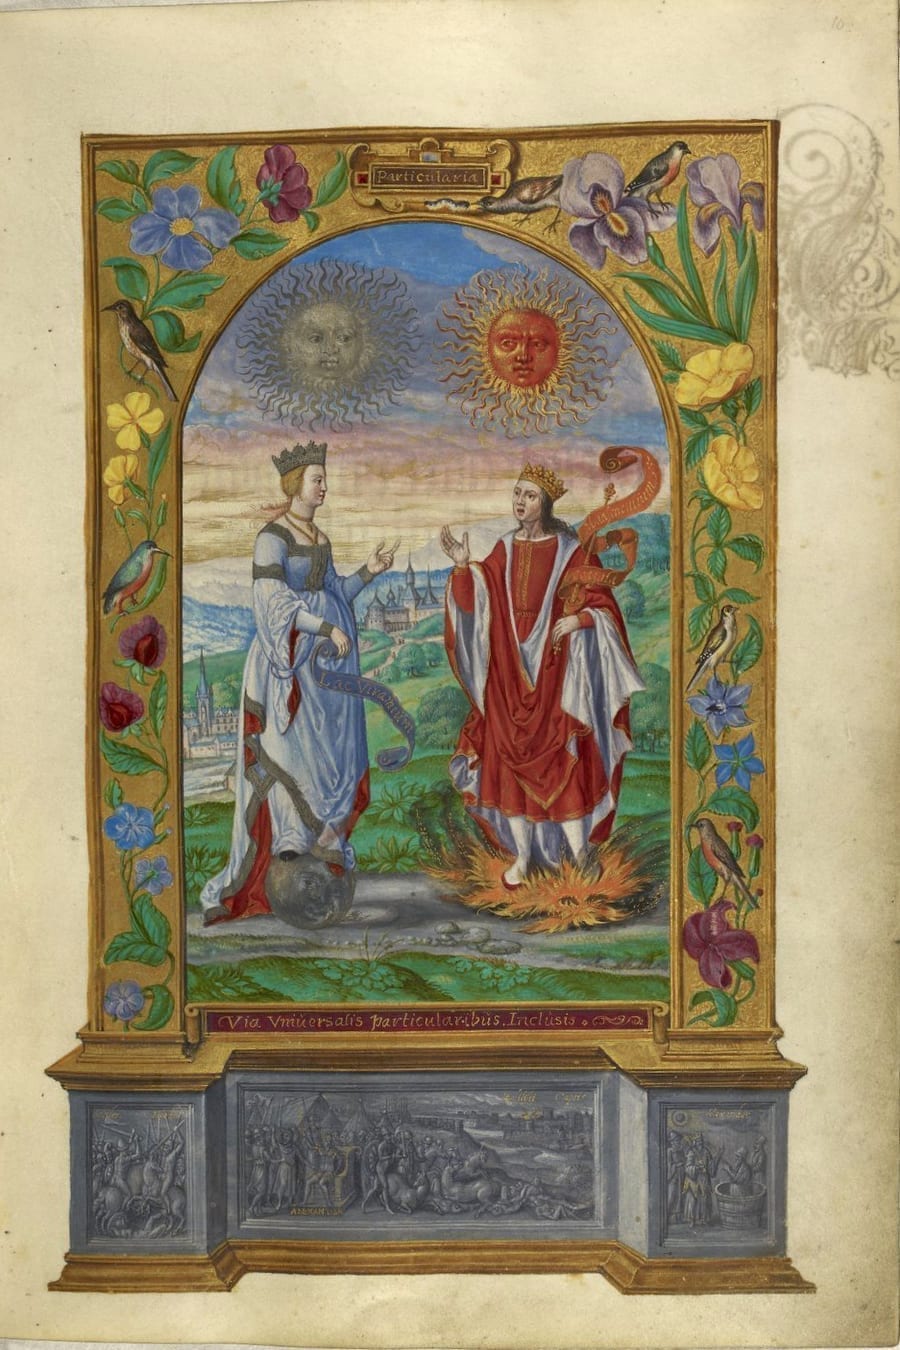 Illustration of king and queen from the Alchemical manuscript Splendor Solis